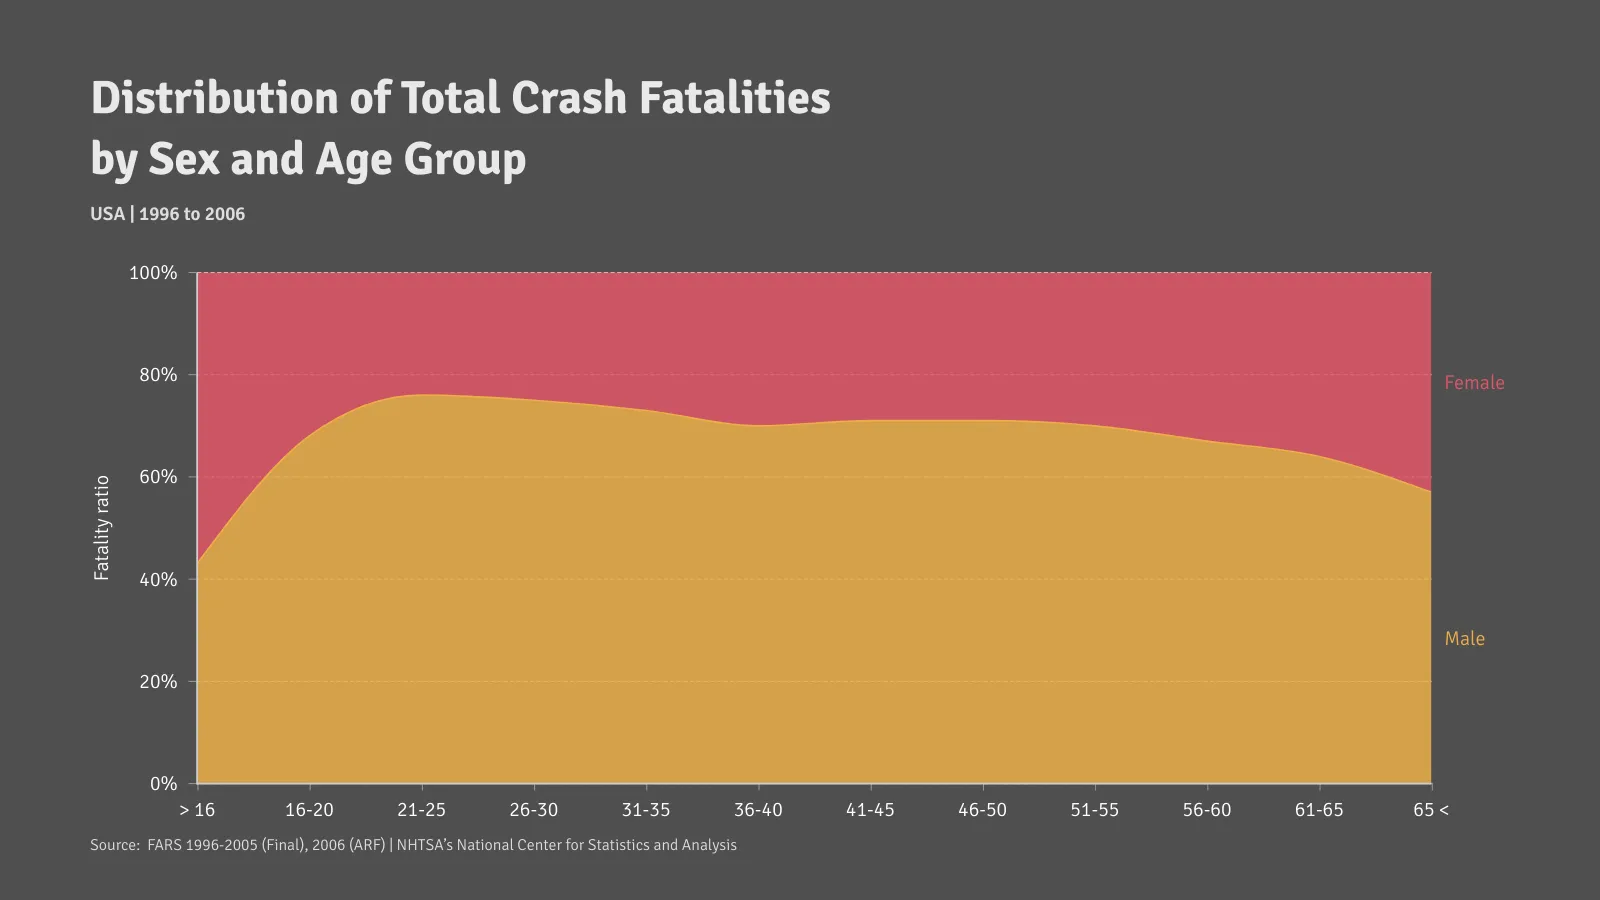 100% Stacked Area Chart example: Distribution of Total Crash Fatalities 
by Sex and Age Group